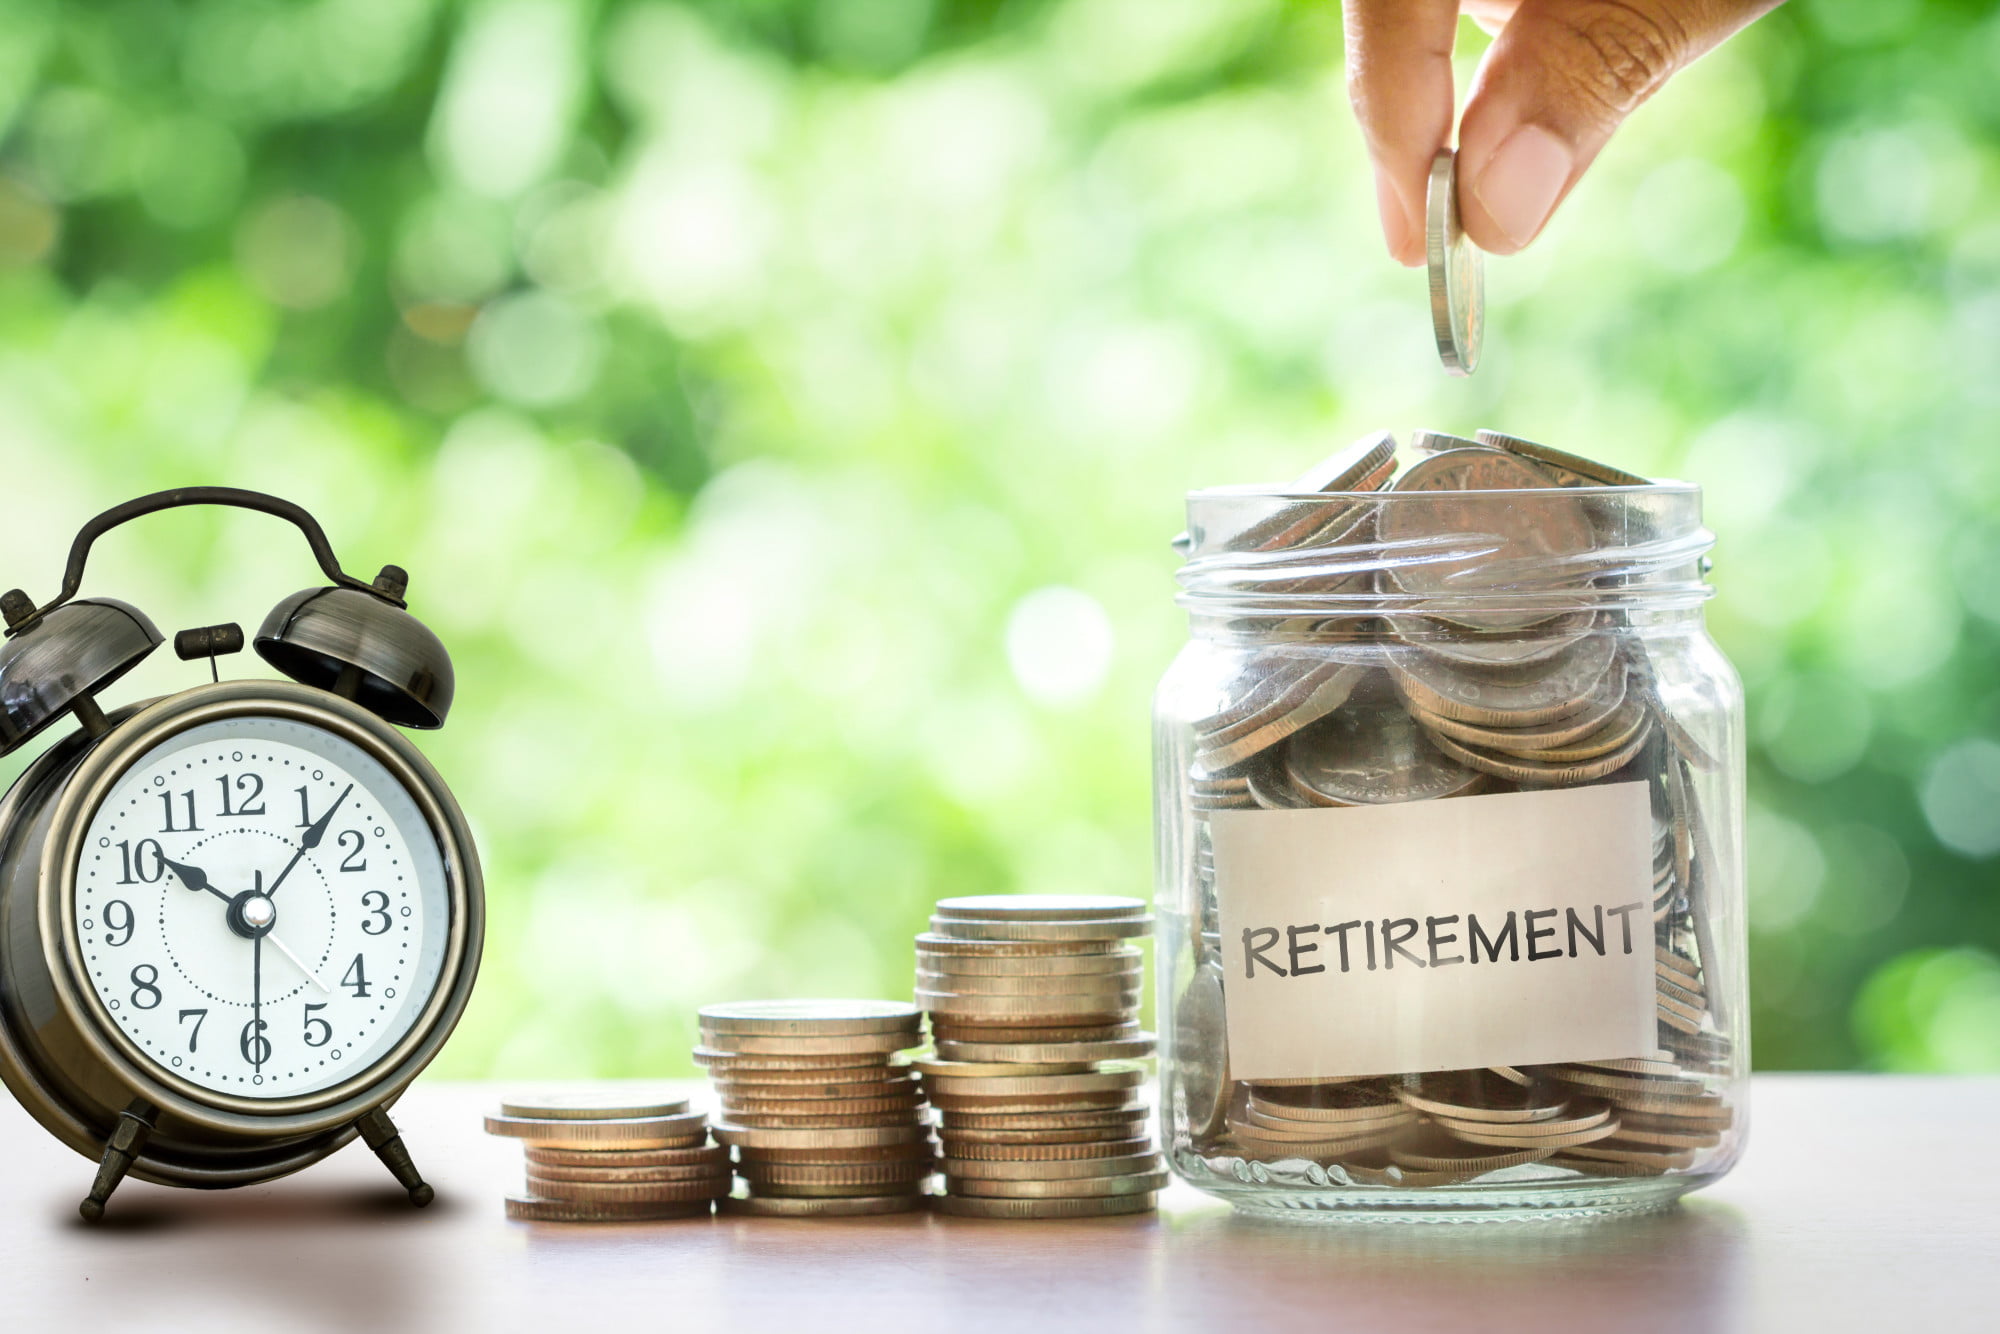 Did you know that not all retirement plans are created equal these days? Here are the many different types of retirement plans that exist today.